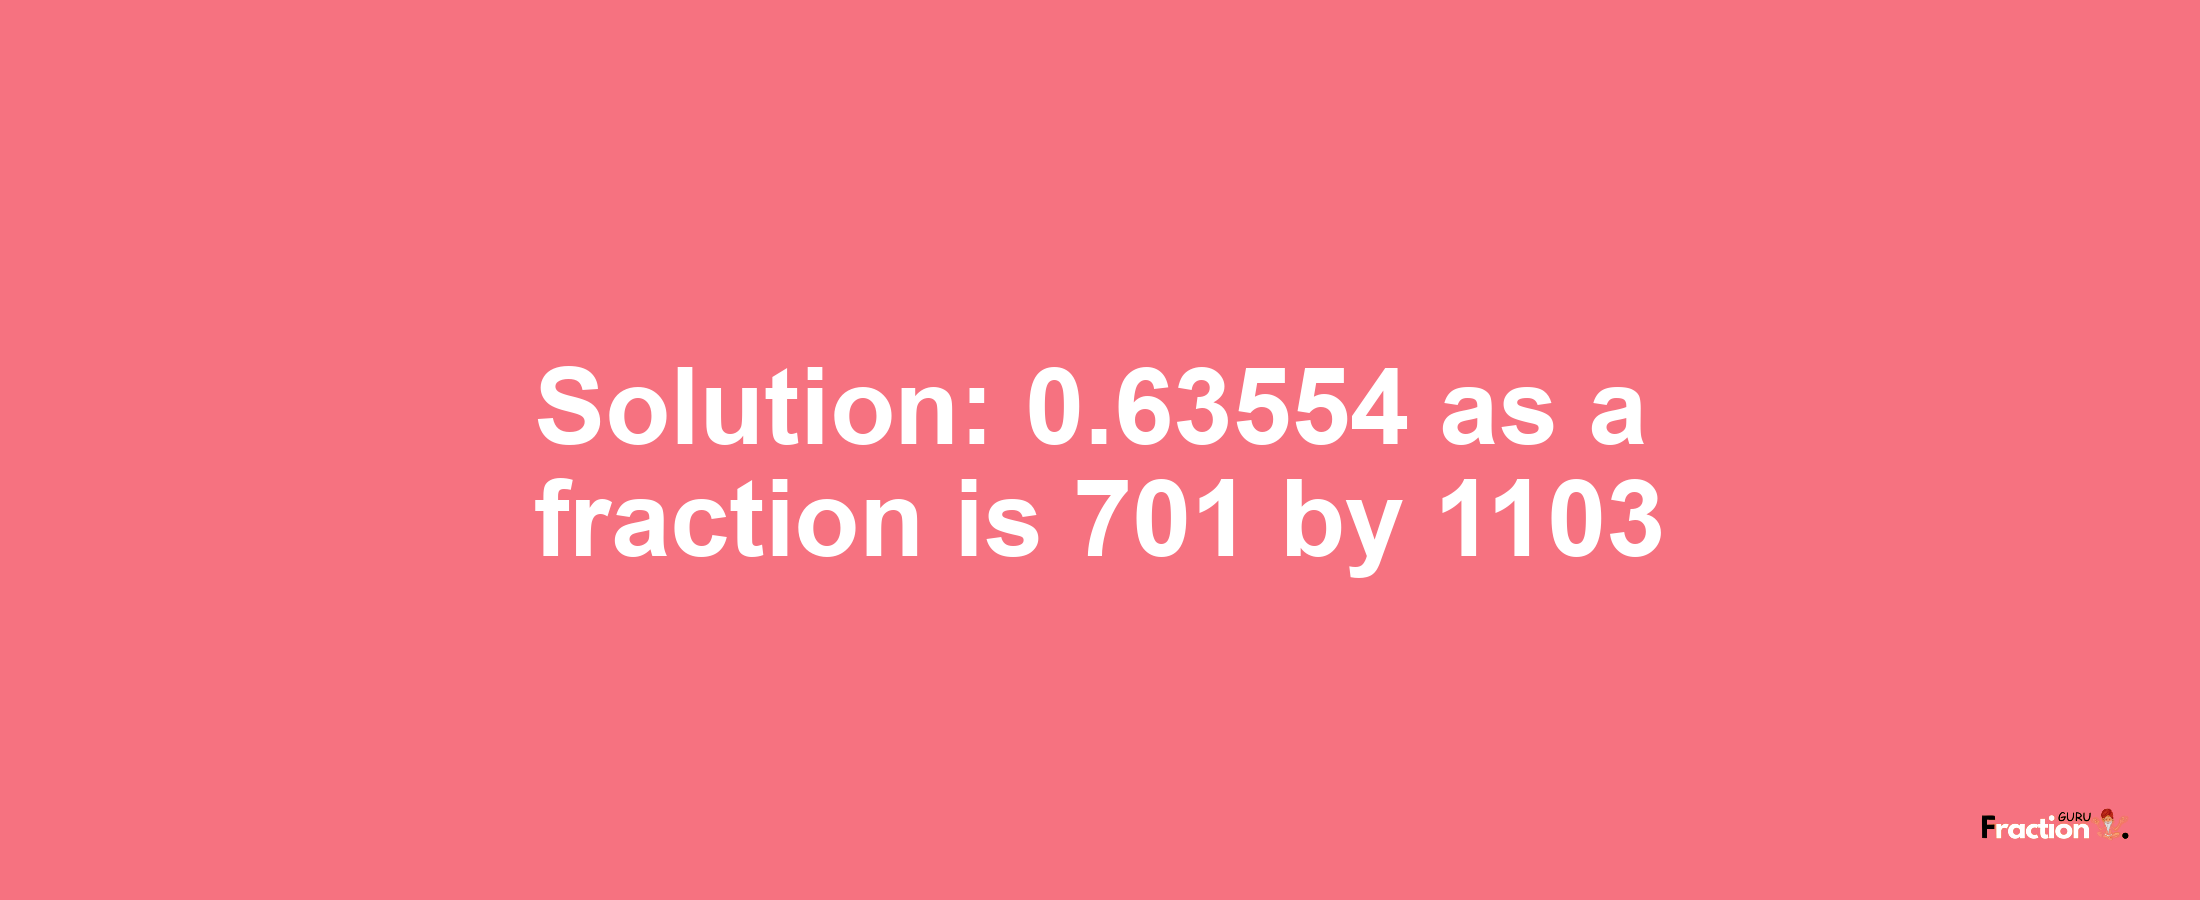 Solution:0.63554 as a fraction is 701/1103